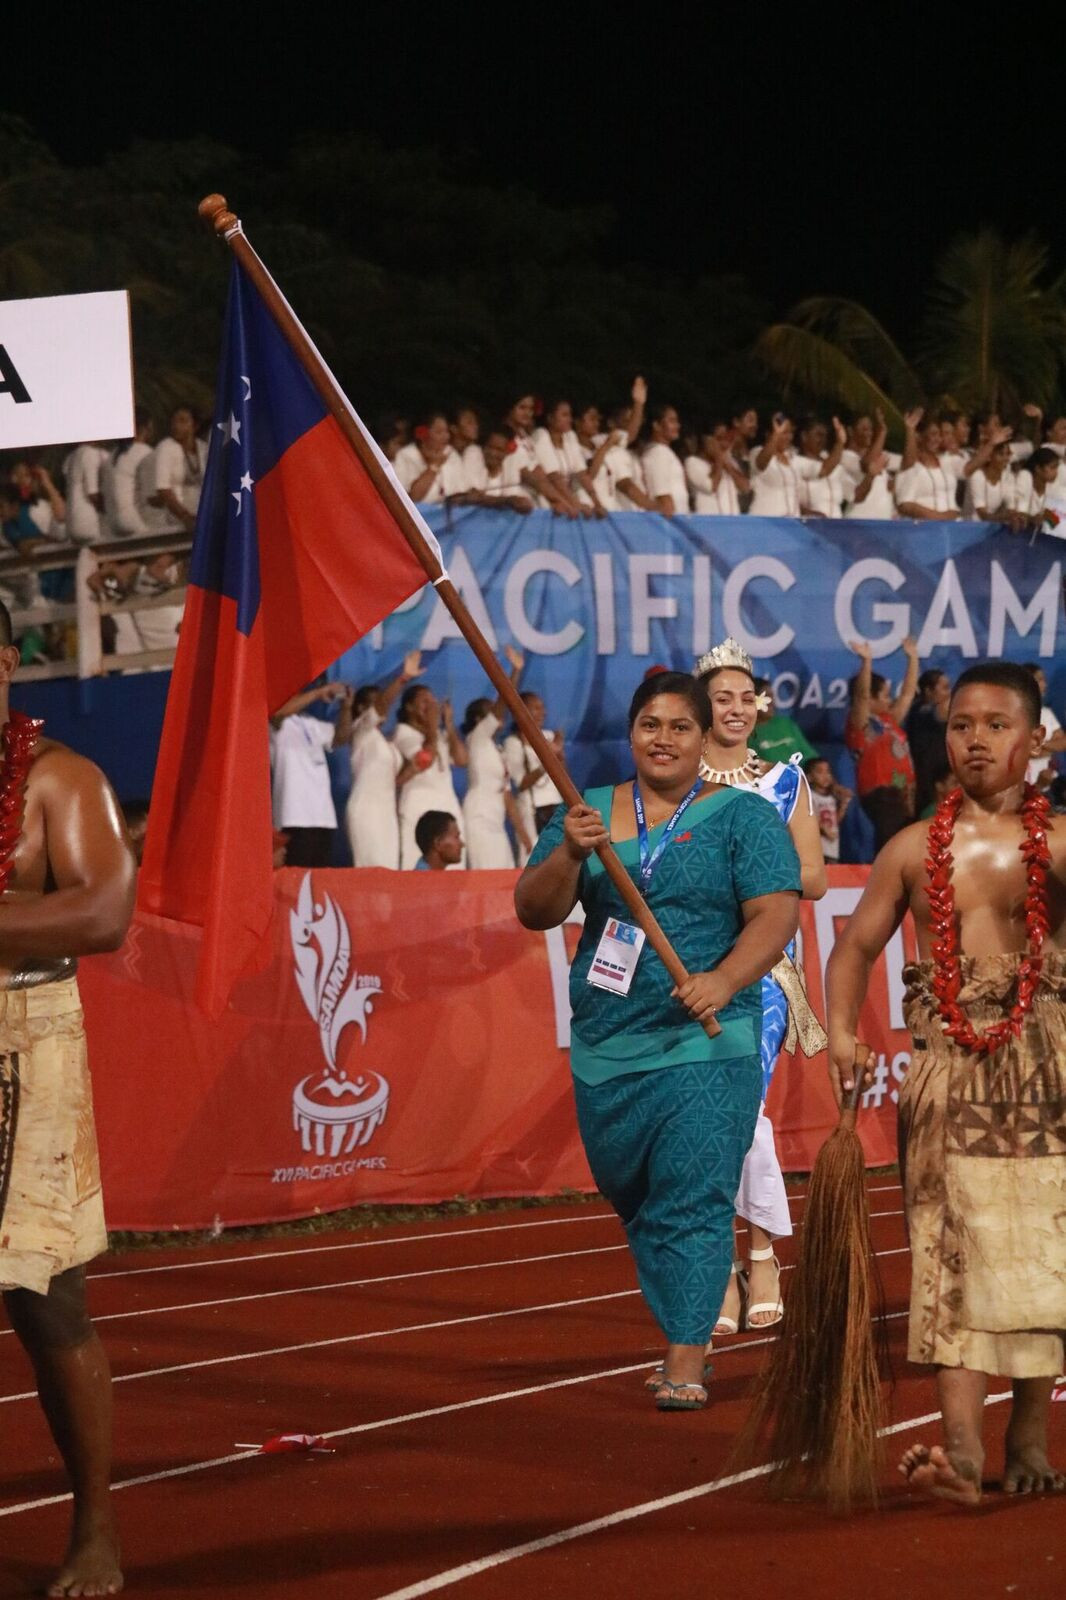 The Samoan team are led out by weightlifter Feagaiga Stowers at the Pacific Games Opening Ceremony ©Roland Setu/Games News Service